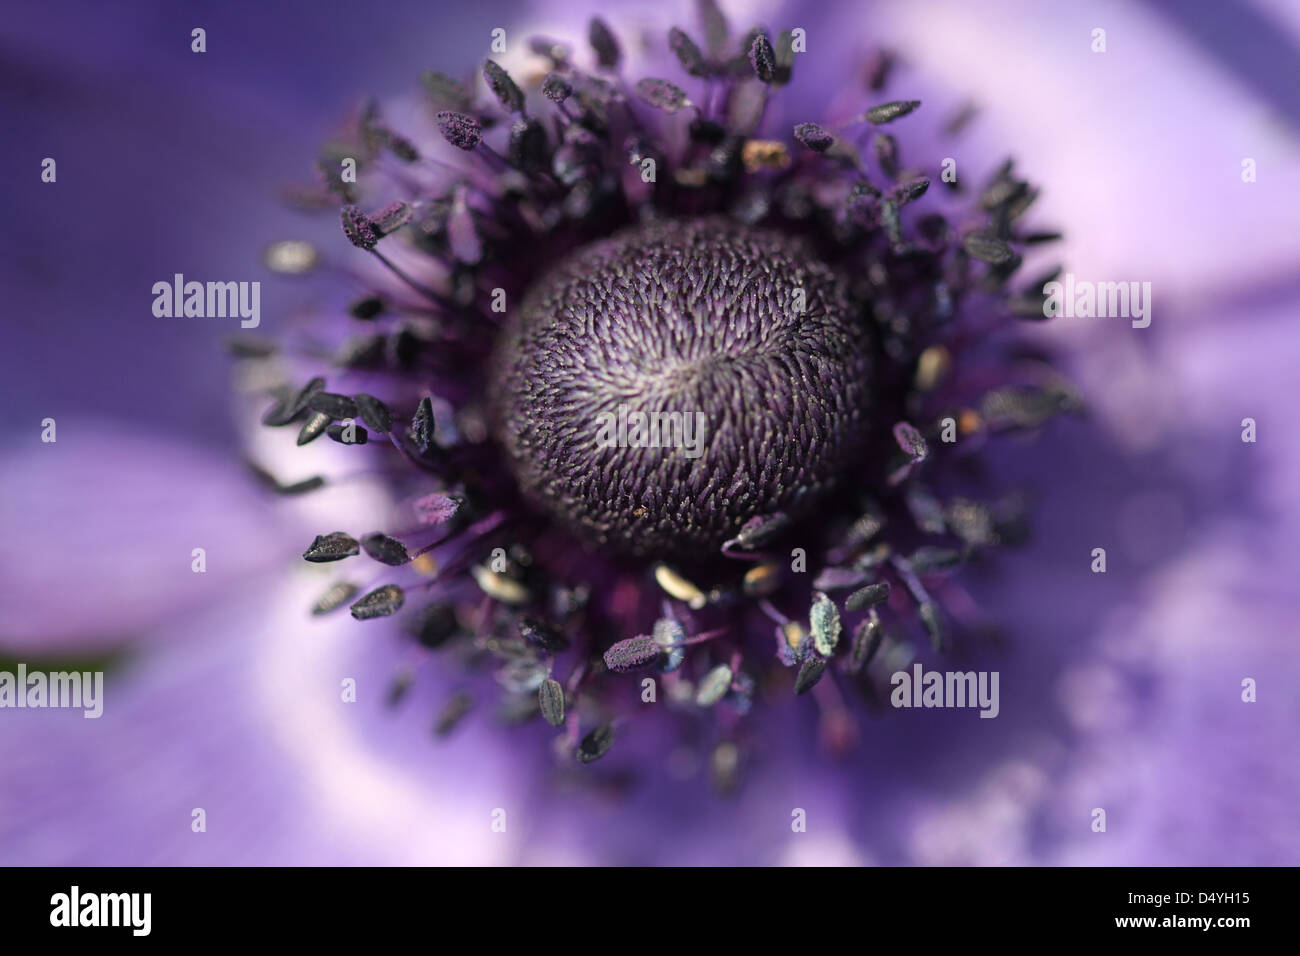 anemone flower close up detail Stock Photo